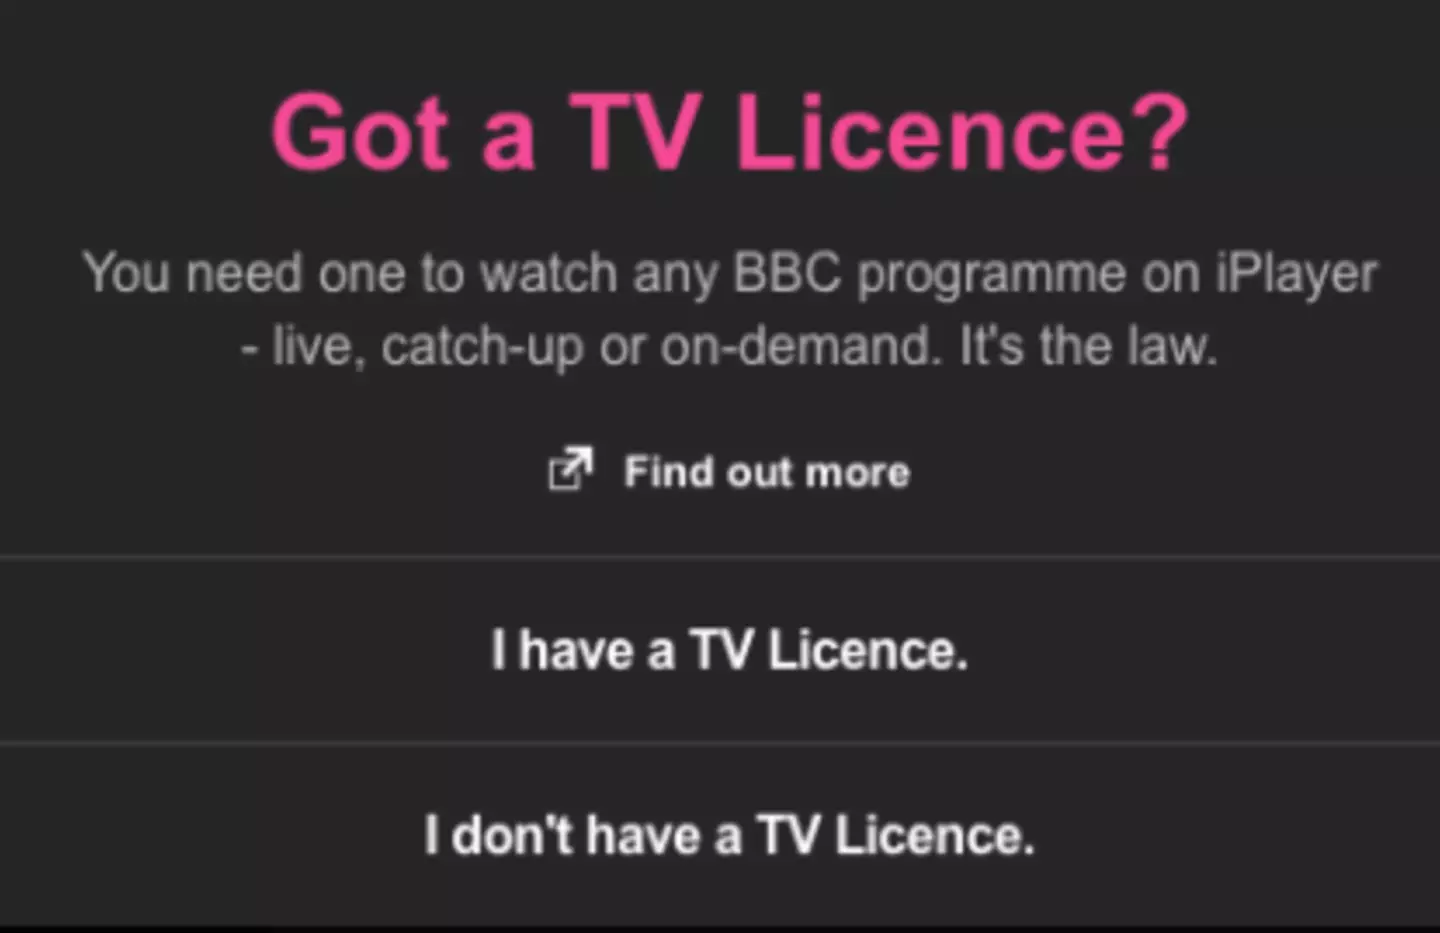 Some people are exempt for needing a licence.